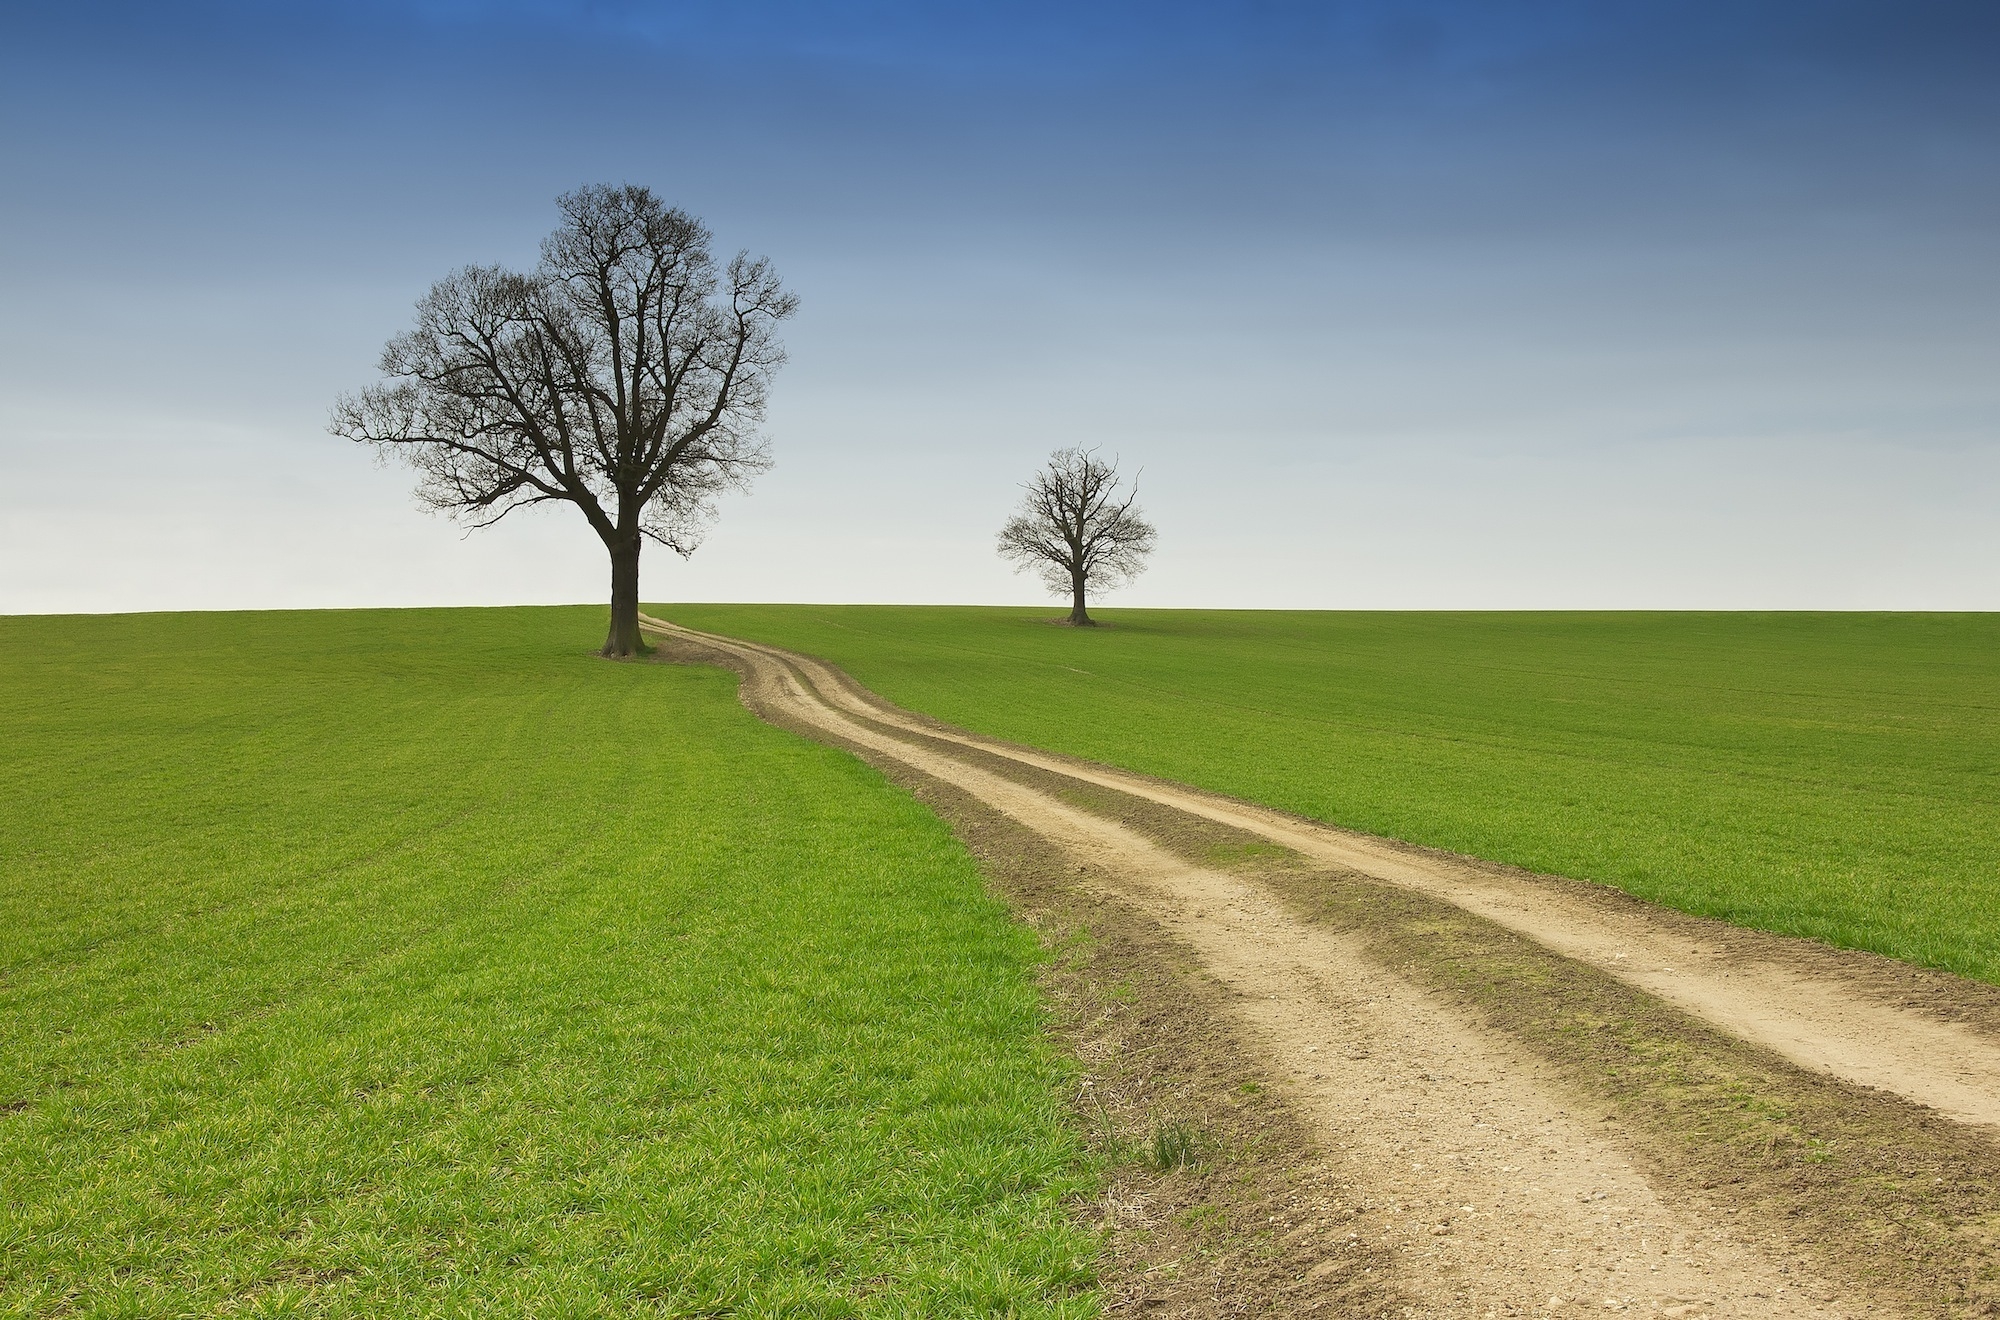 Wallpaper Full HD trees, nature, road, summer, field, country, emptiness, void, countryside